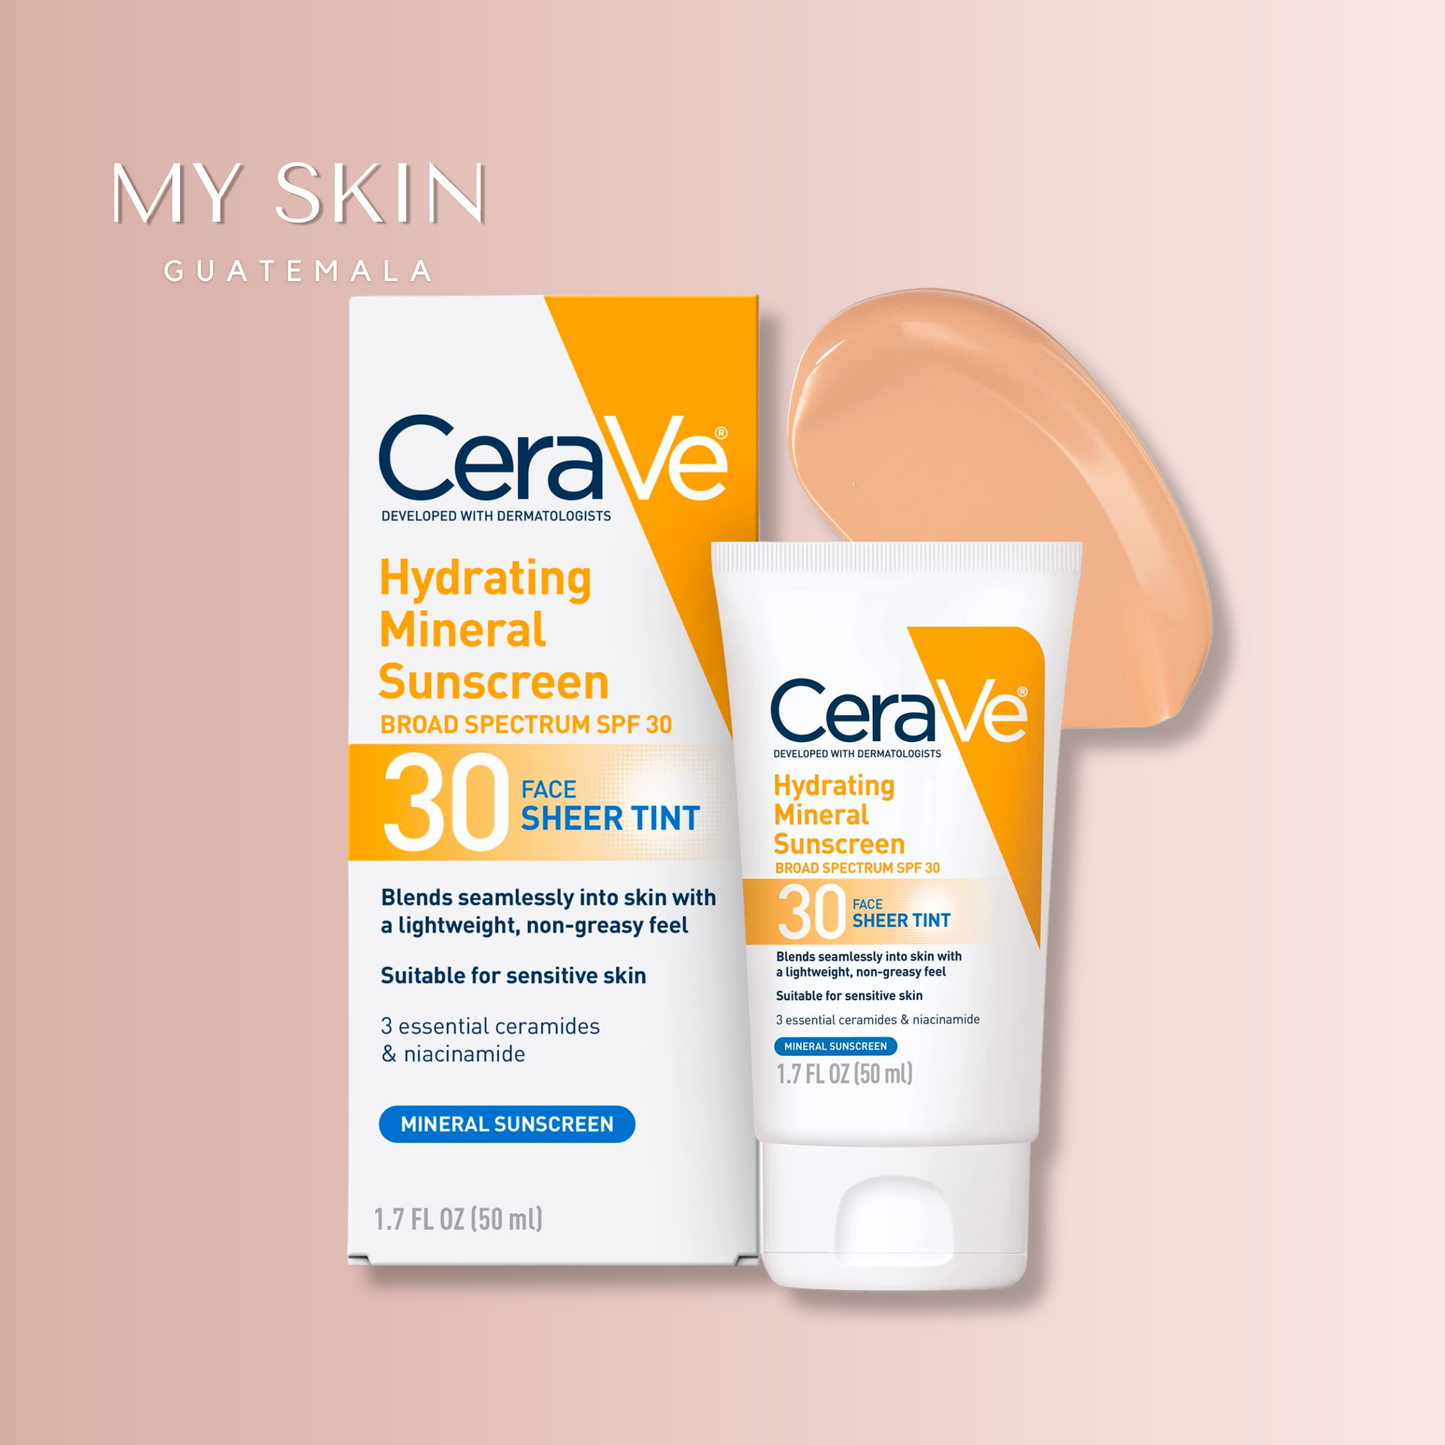 CeraVe Hydrating Mineral Sunscreen - Sheer Tint Facial SPF 30